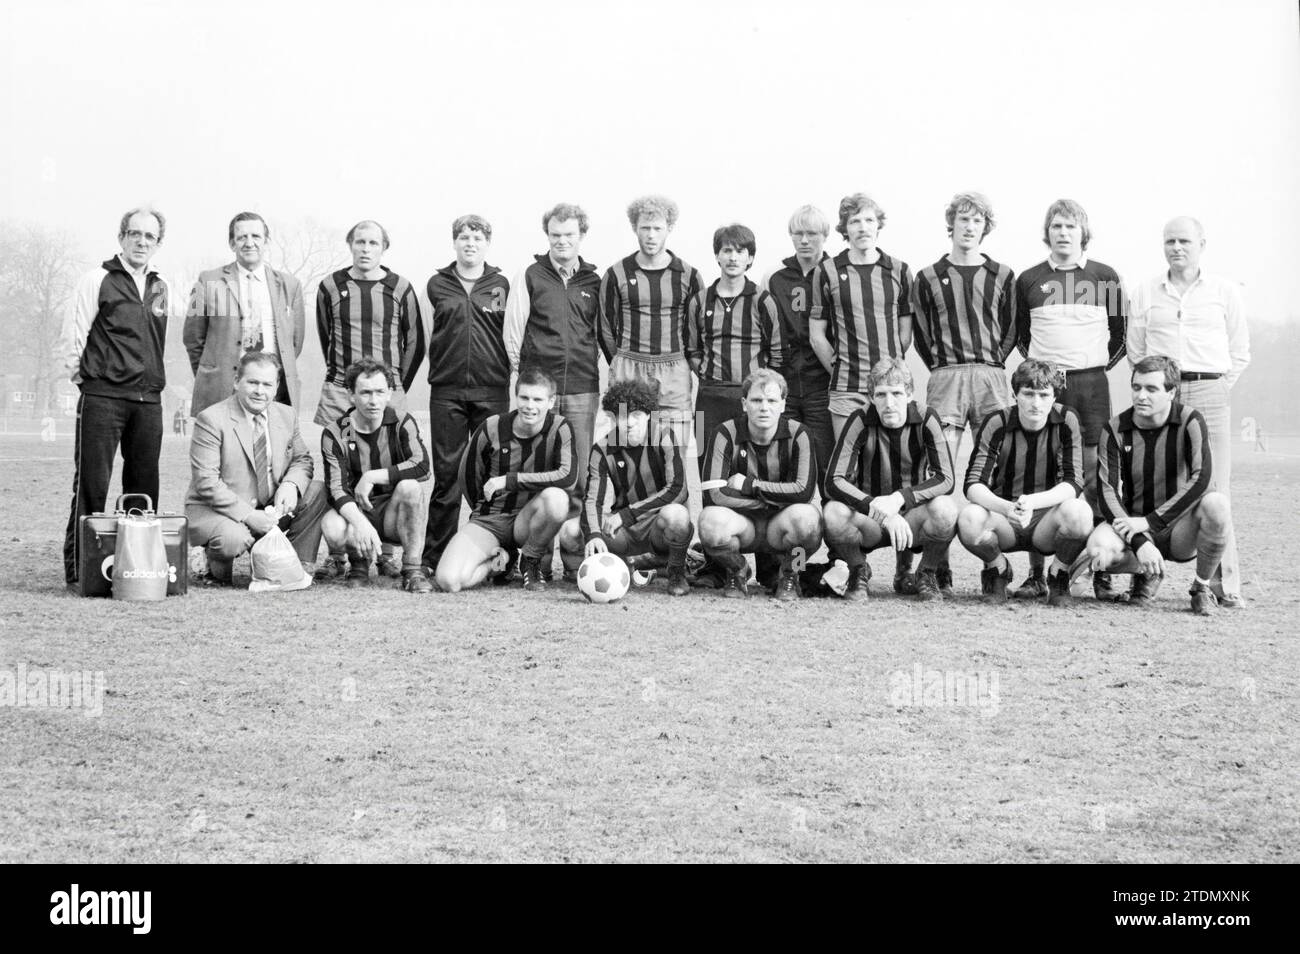 Team photo Halfweg, Football Zandvoortse Meeuwen Halfweg, 27-03-1982, Whizgle News from the Past, Tailored for the Future. Explore historical narratives, Dutch The Netherlands agency image with a modern perspective, bridging the gap between yesterday's events and tomorrow's insights. A timeless journey shaping the stories that shape our future Stock Photo